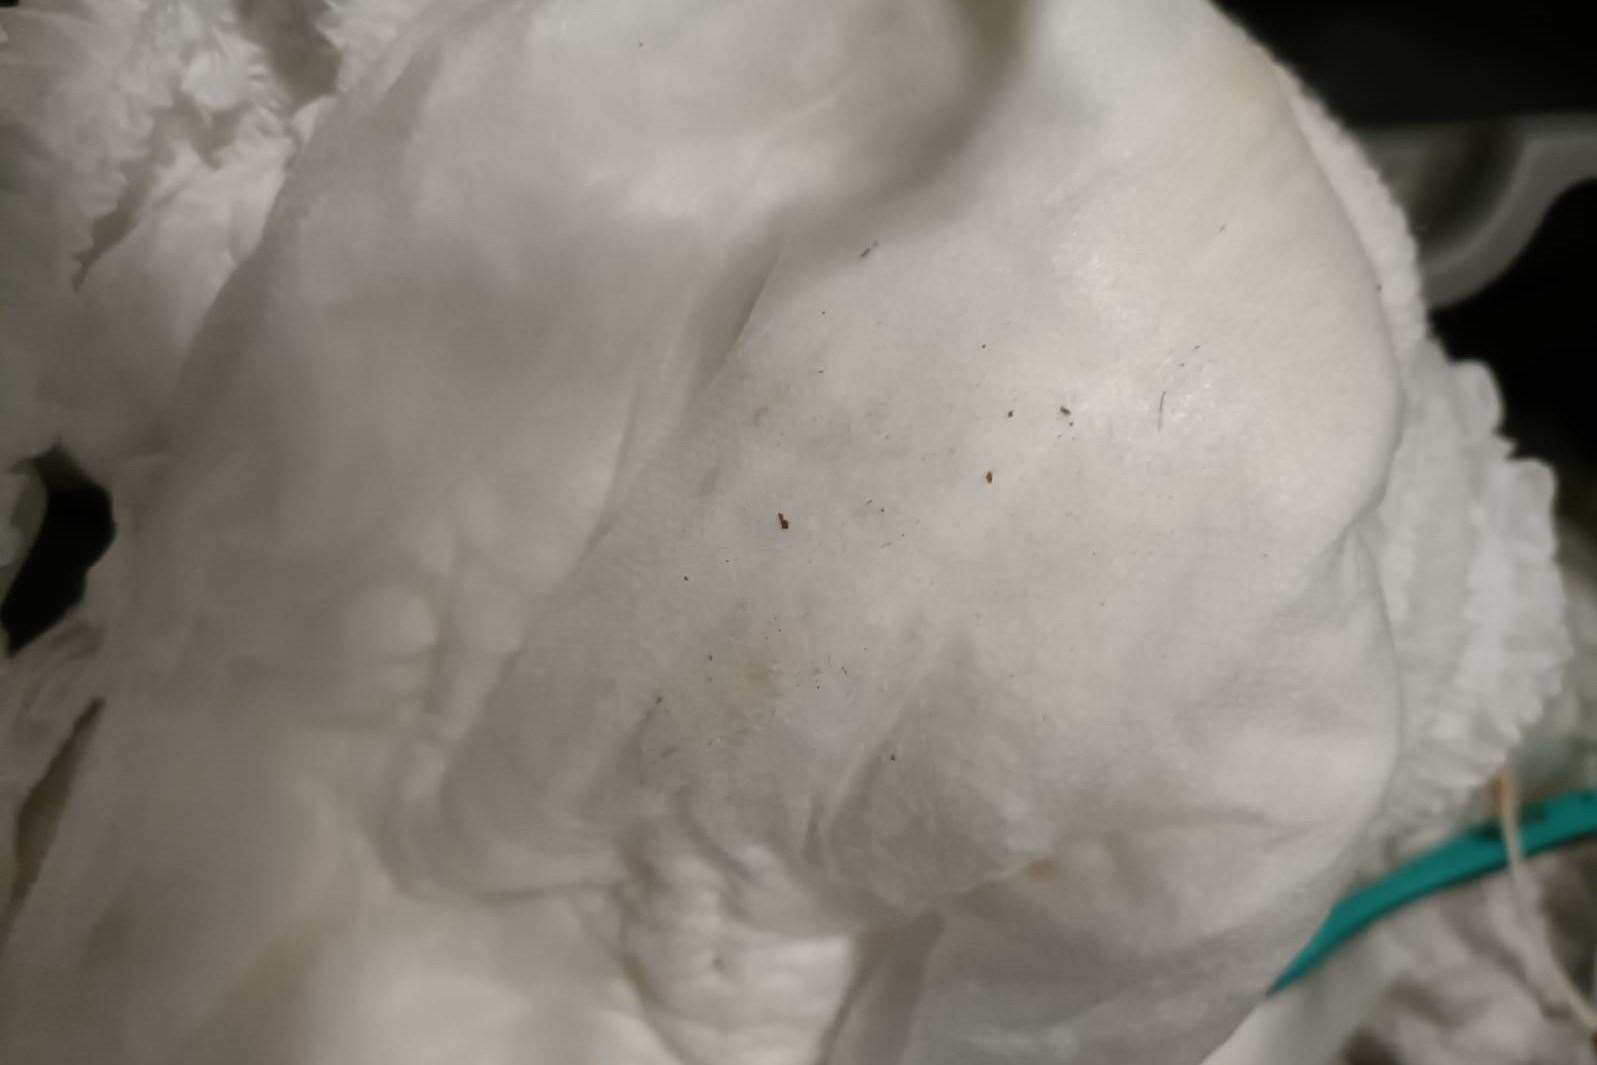 The bed bugs on Sally's incontinence pads